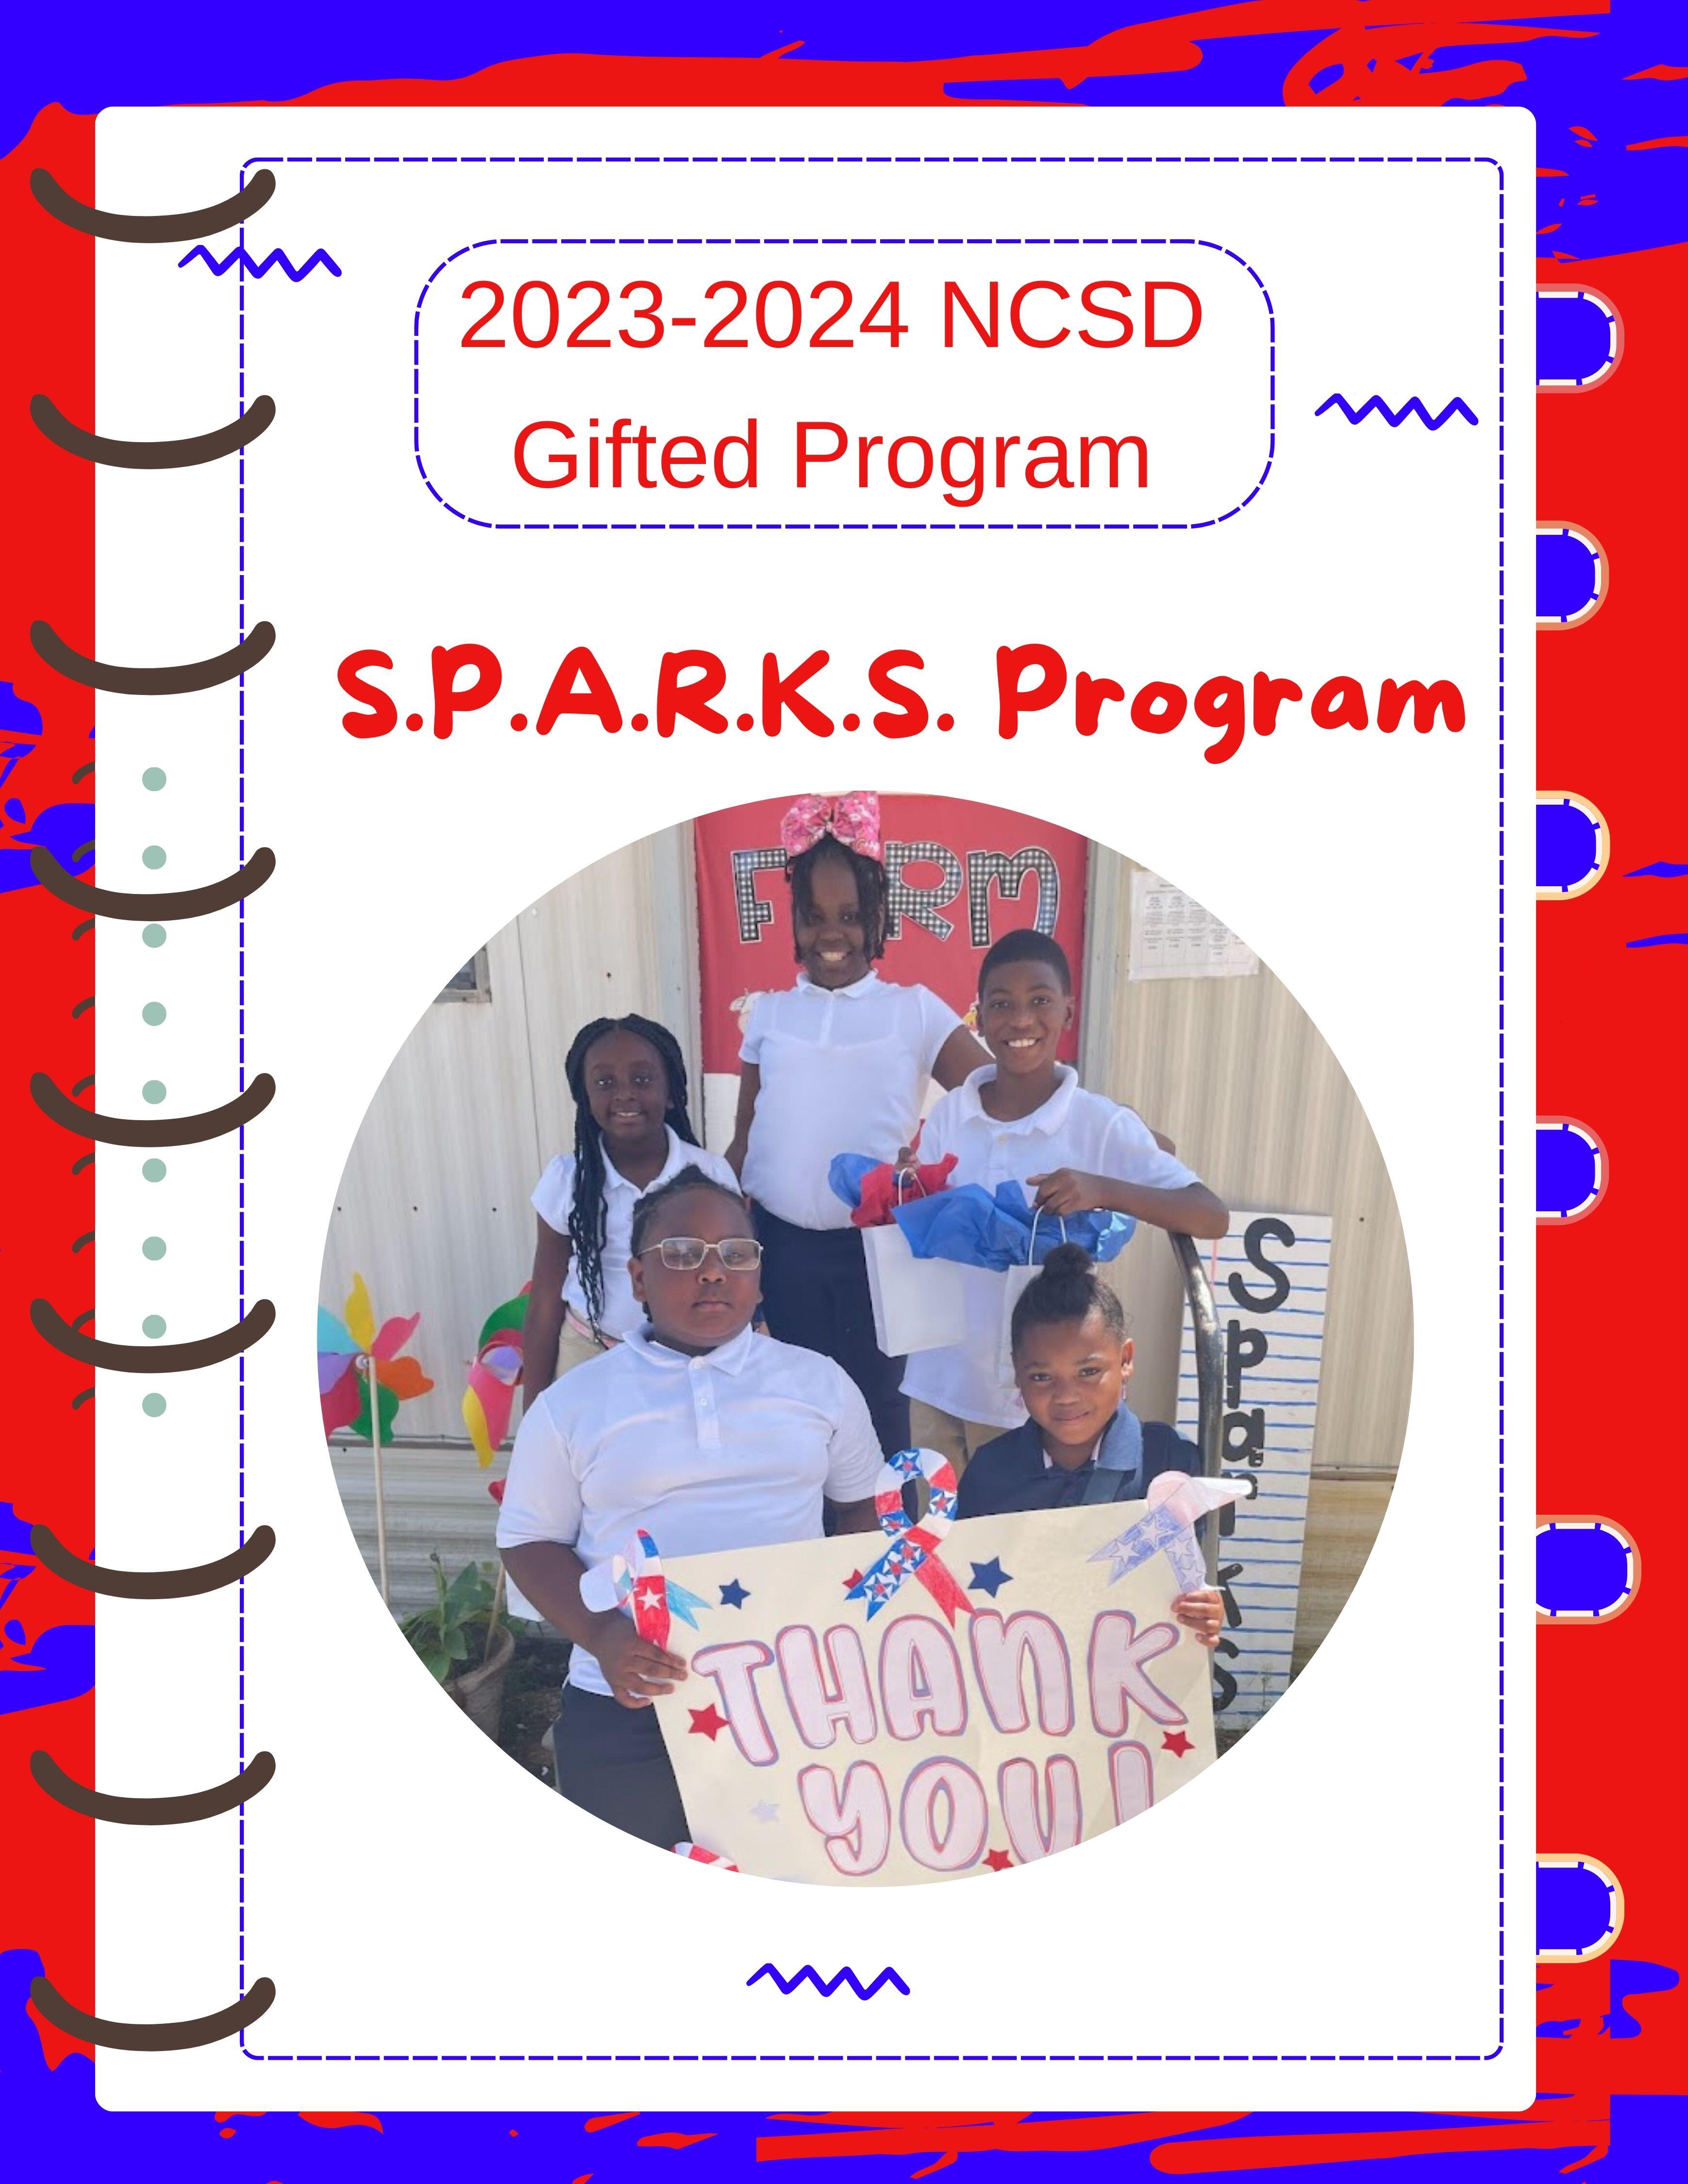 NCSD Gifted "SPARKS" Program